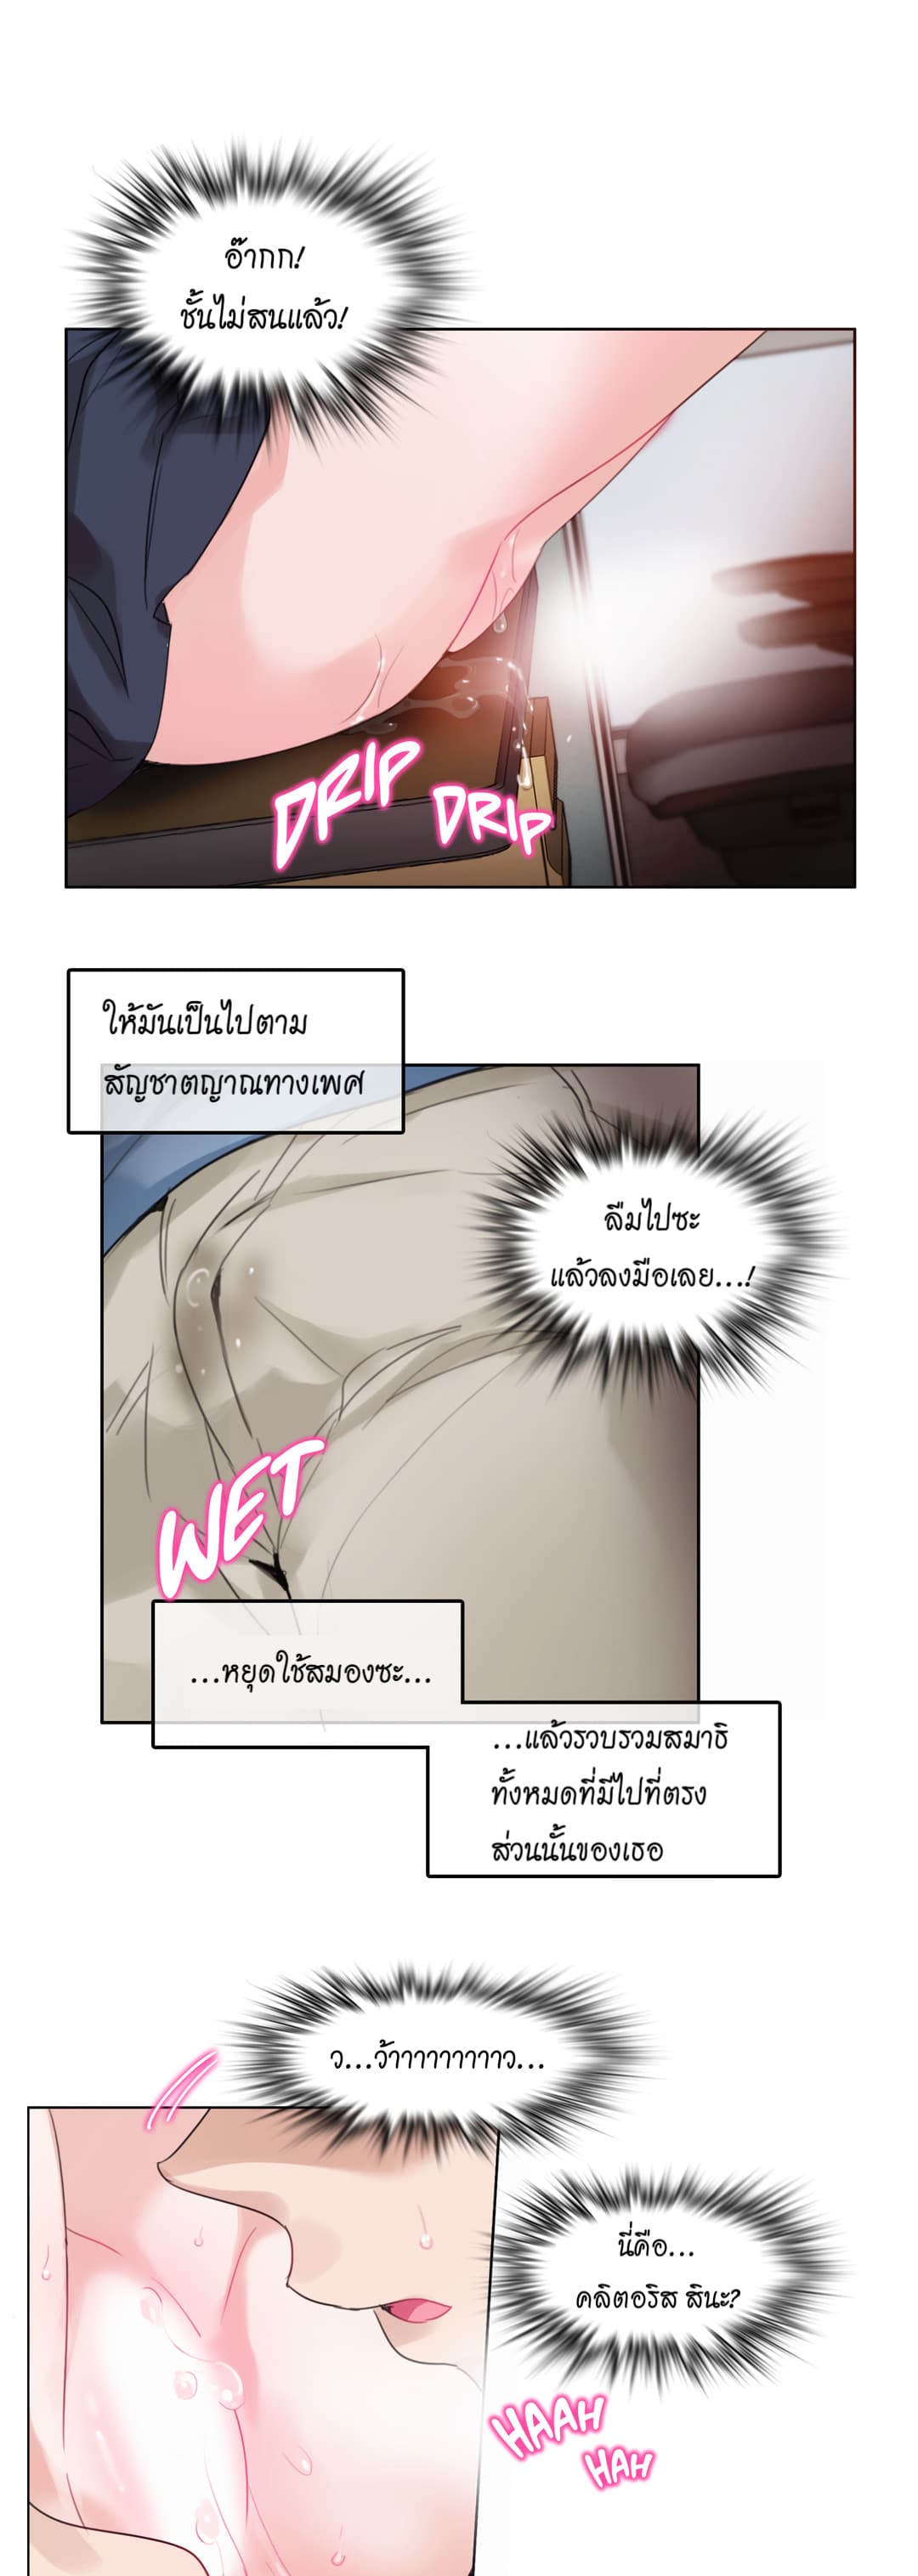 A Pervert’s Daily Life 24 (23)